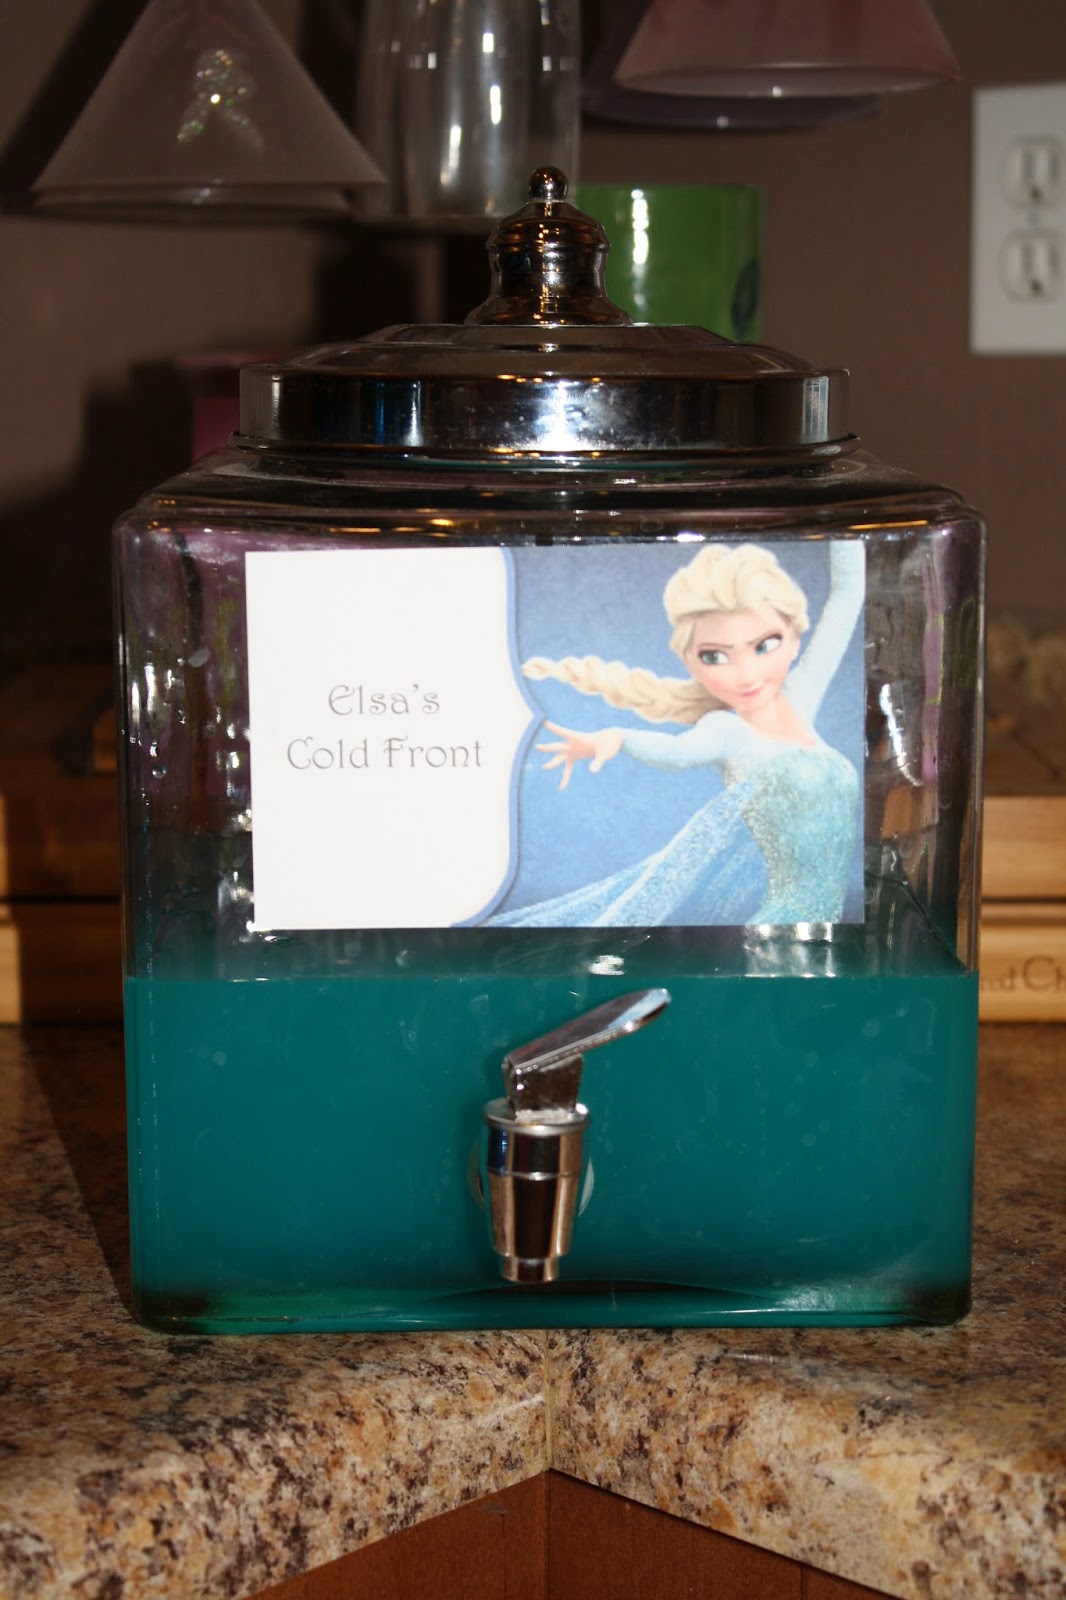 From Heels To Home Cooked Meals: Frozen Themed Blue Margarita1066 x 1600